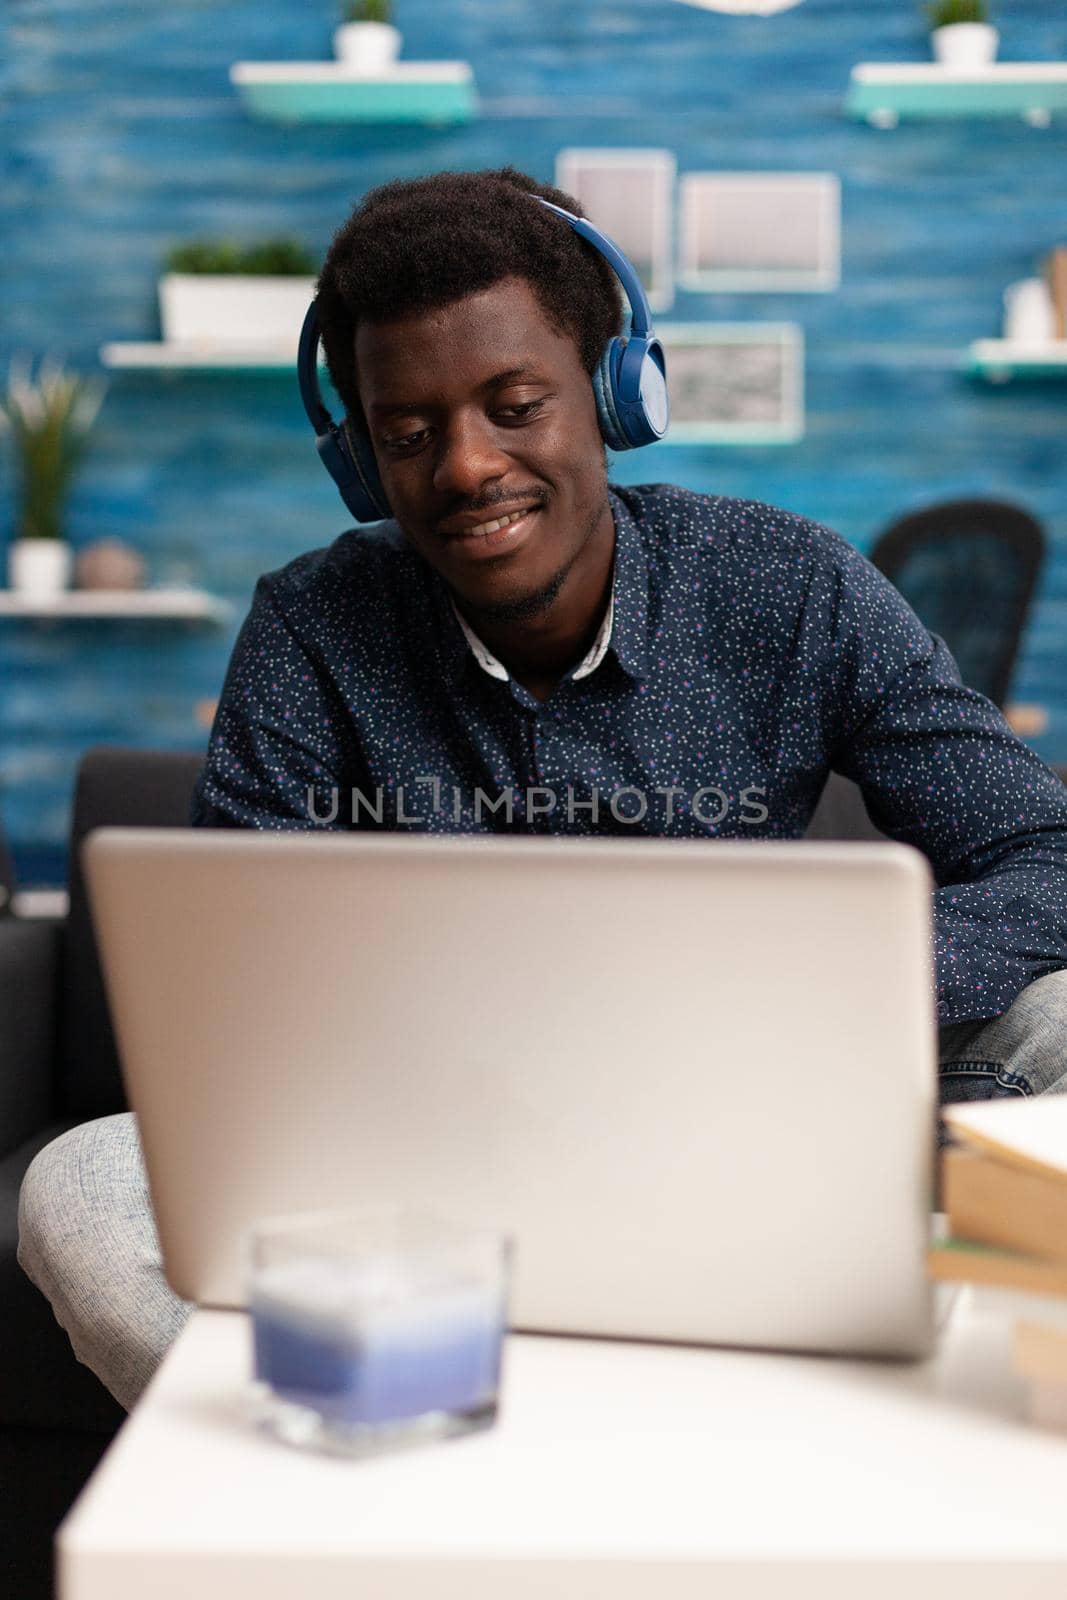 African american man wearing headphones using laptop typing on internet website online services. Working from home black computer user utilizing modern technology and communication devices